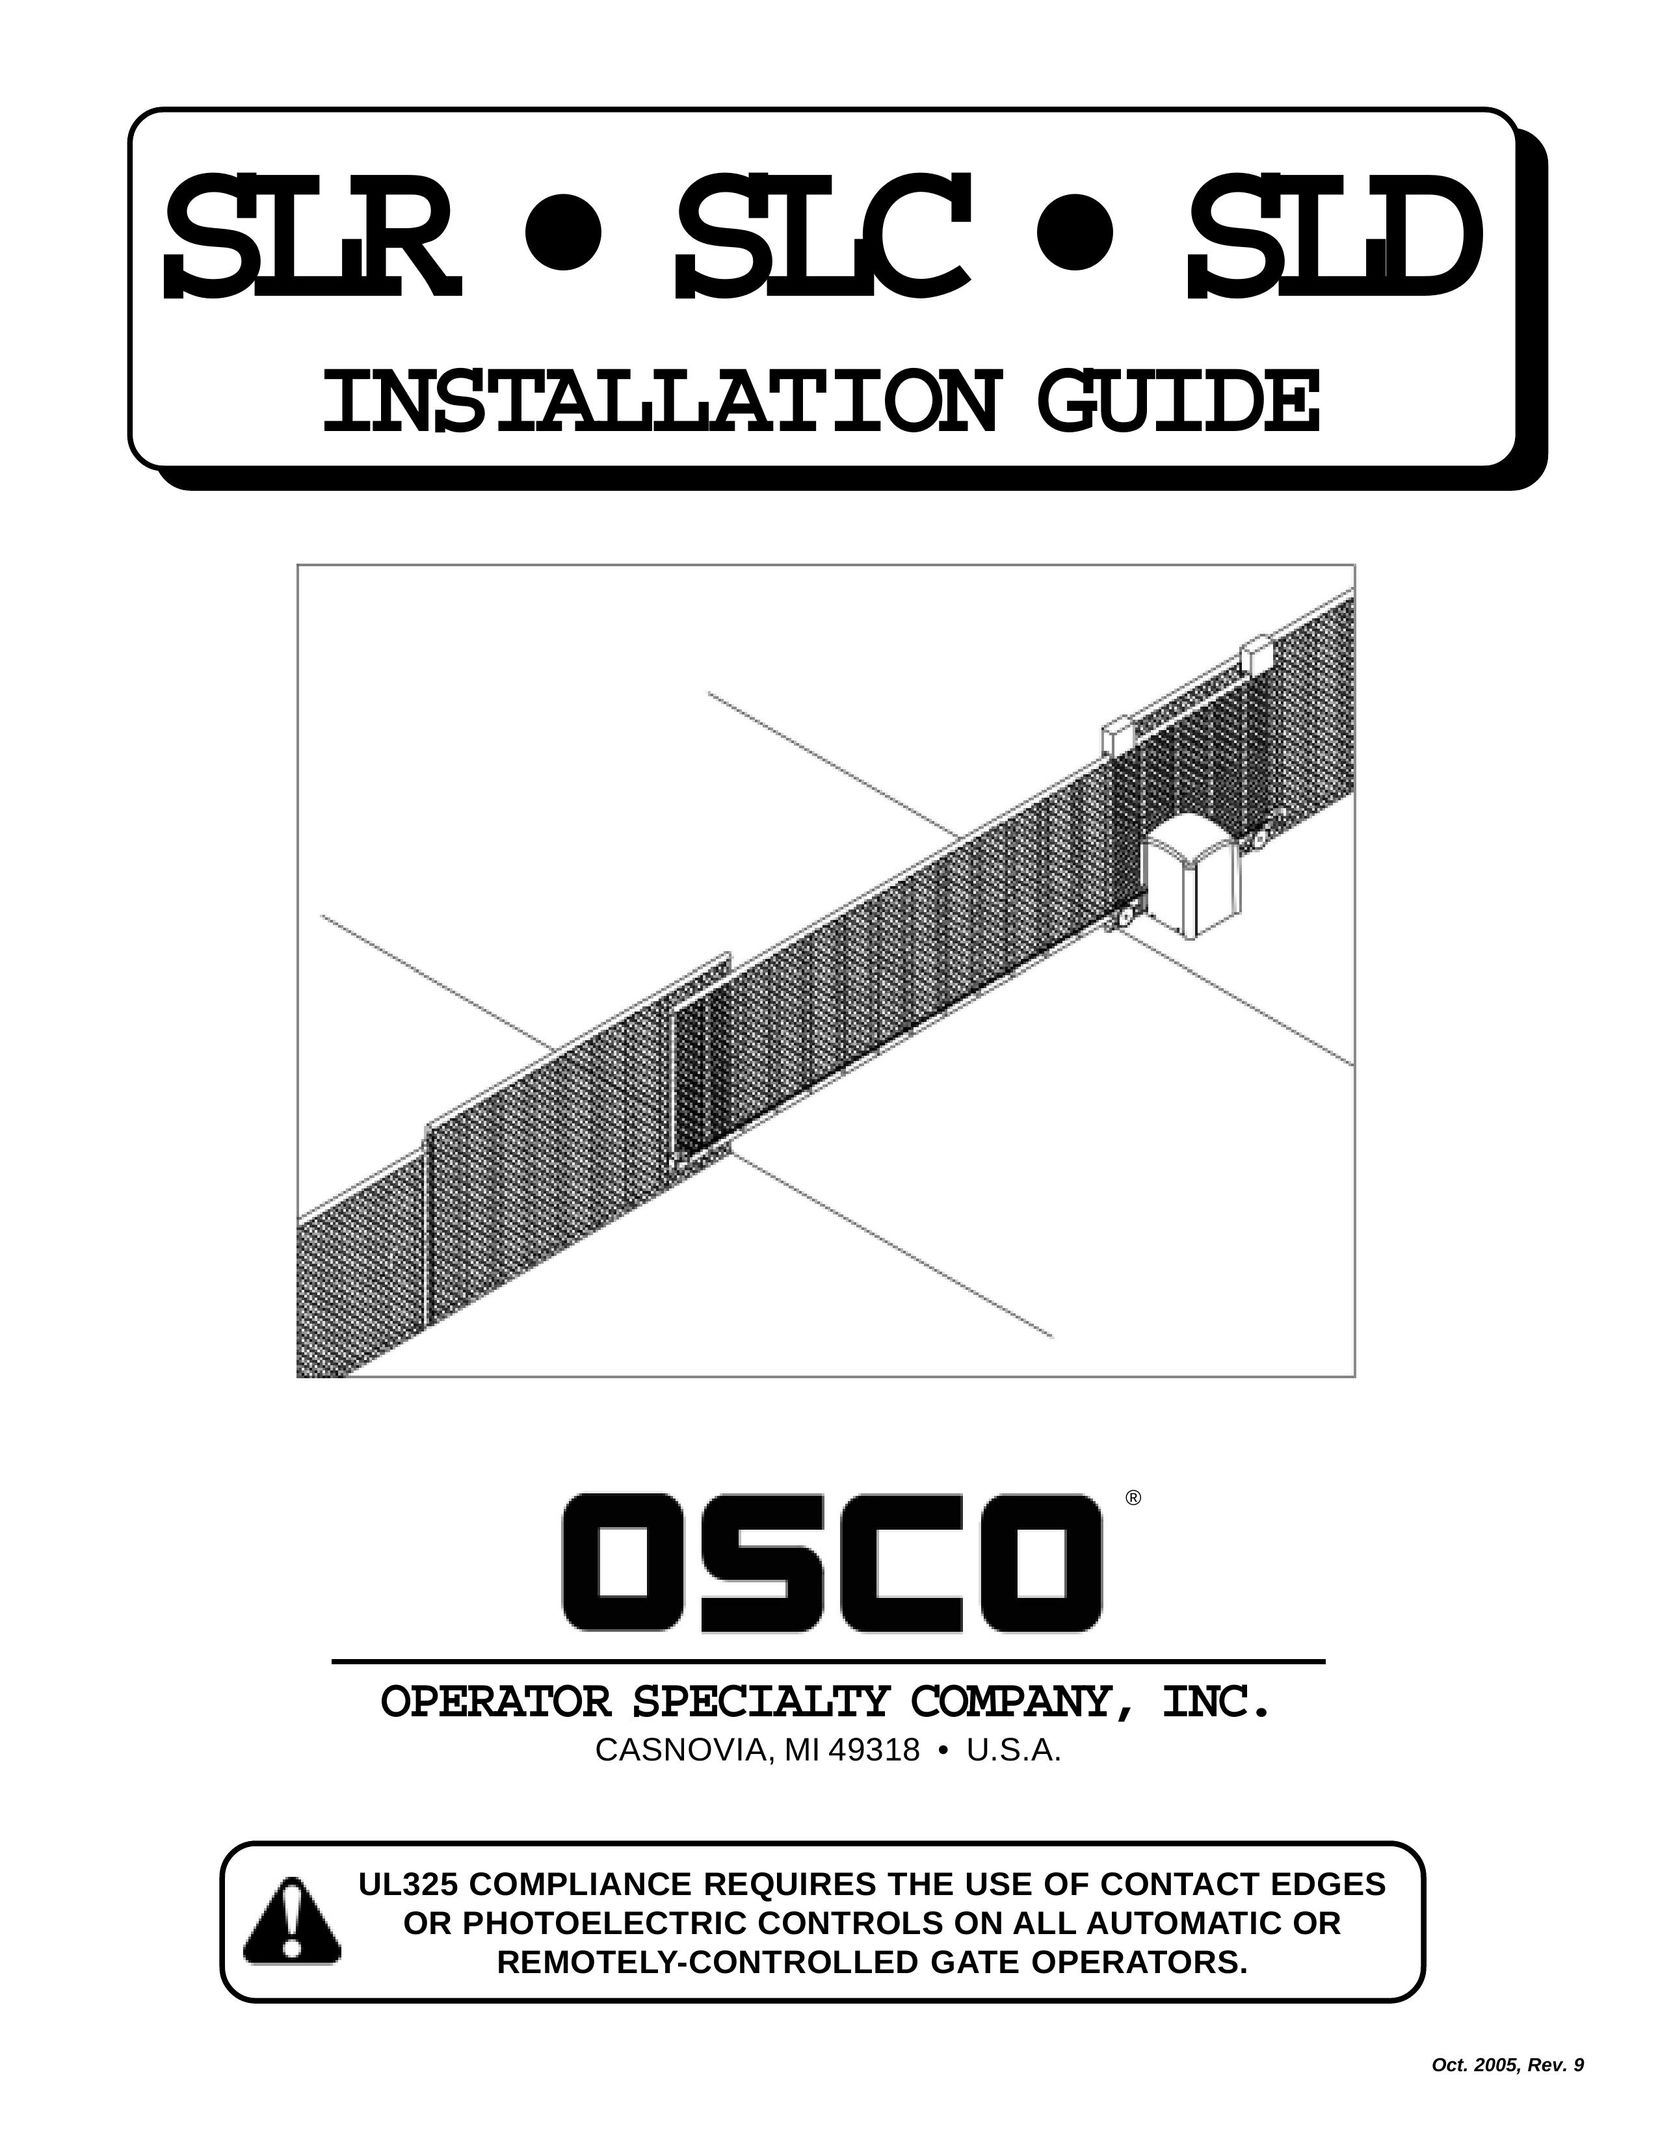 Cosco SLD Safety Gate User Manual